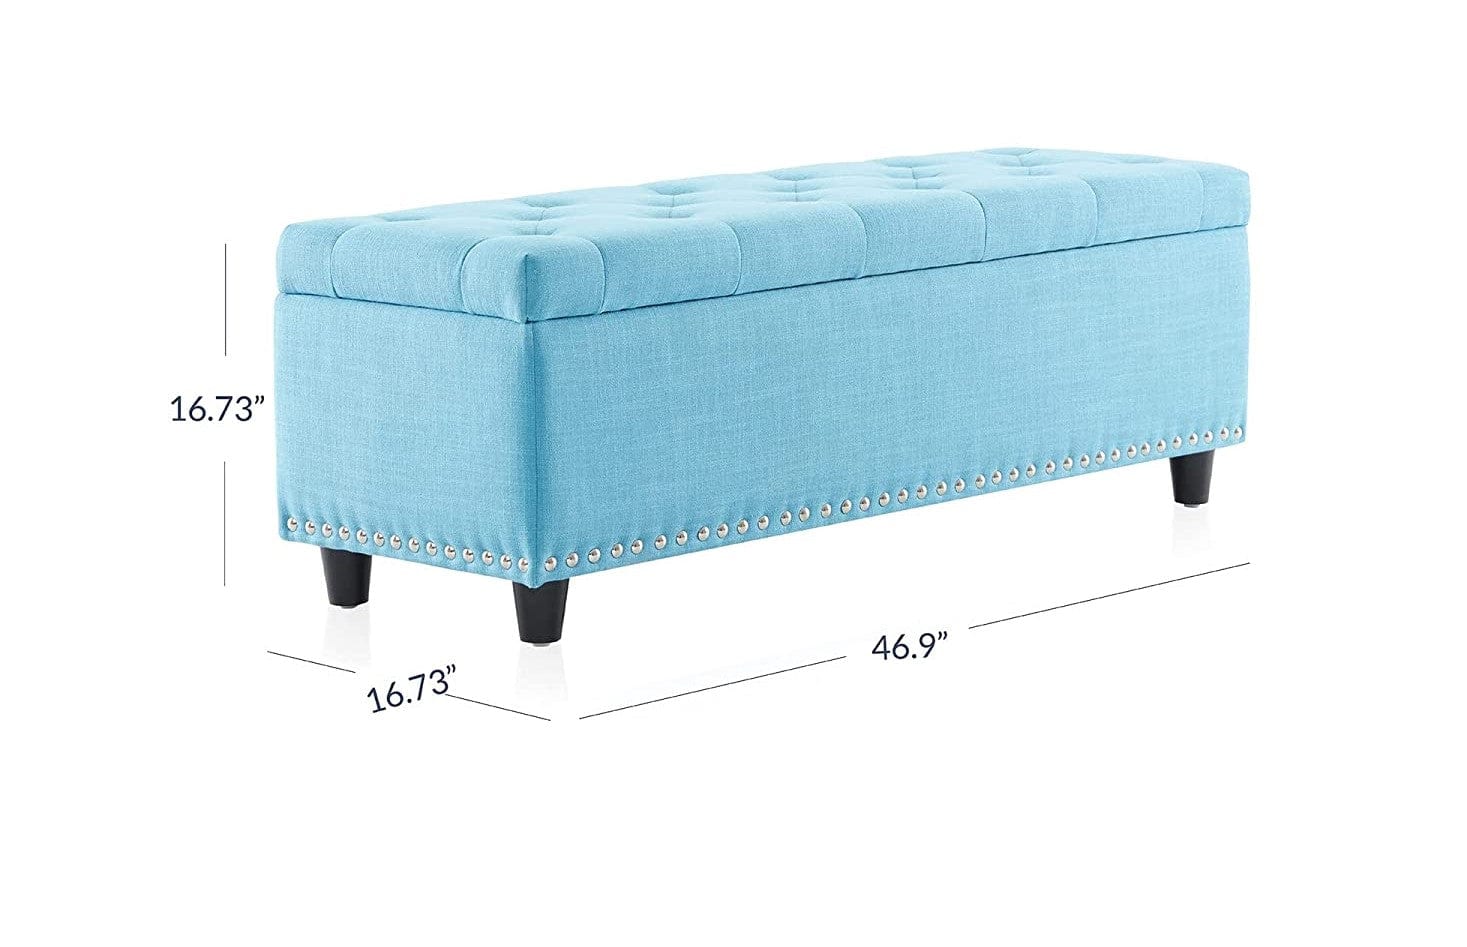 Modern Luxury Button Tufted Ottoman Bench Footrest Decor for Living Room, Entryway, or Bedroom with Storage